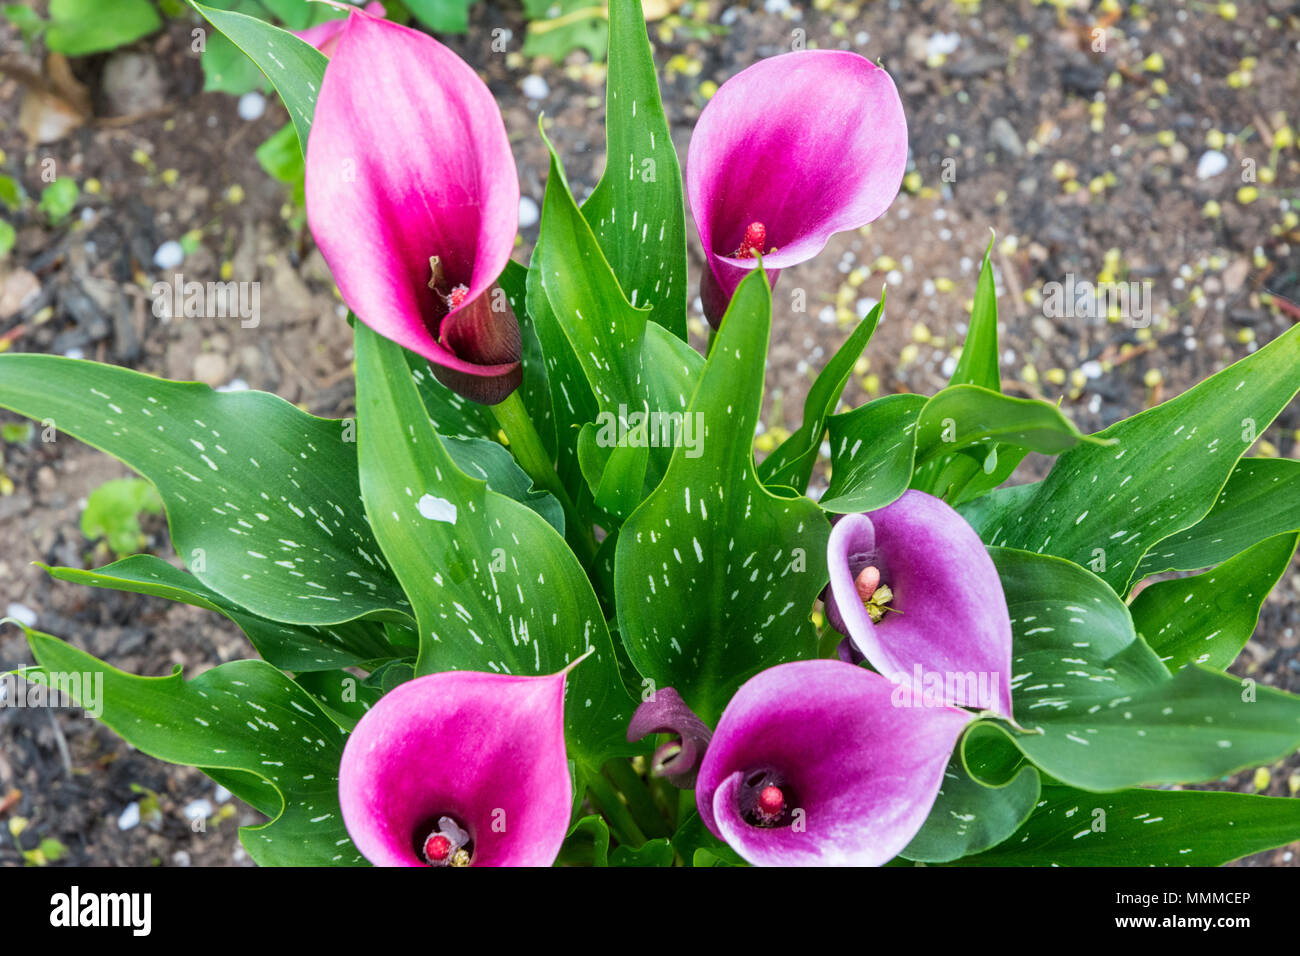 These flowers are called Trumpet Lilies sometimes. Stock Photo